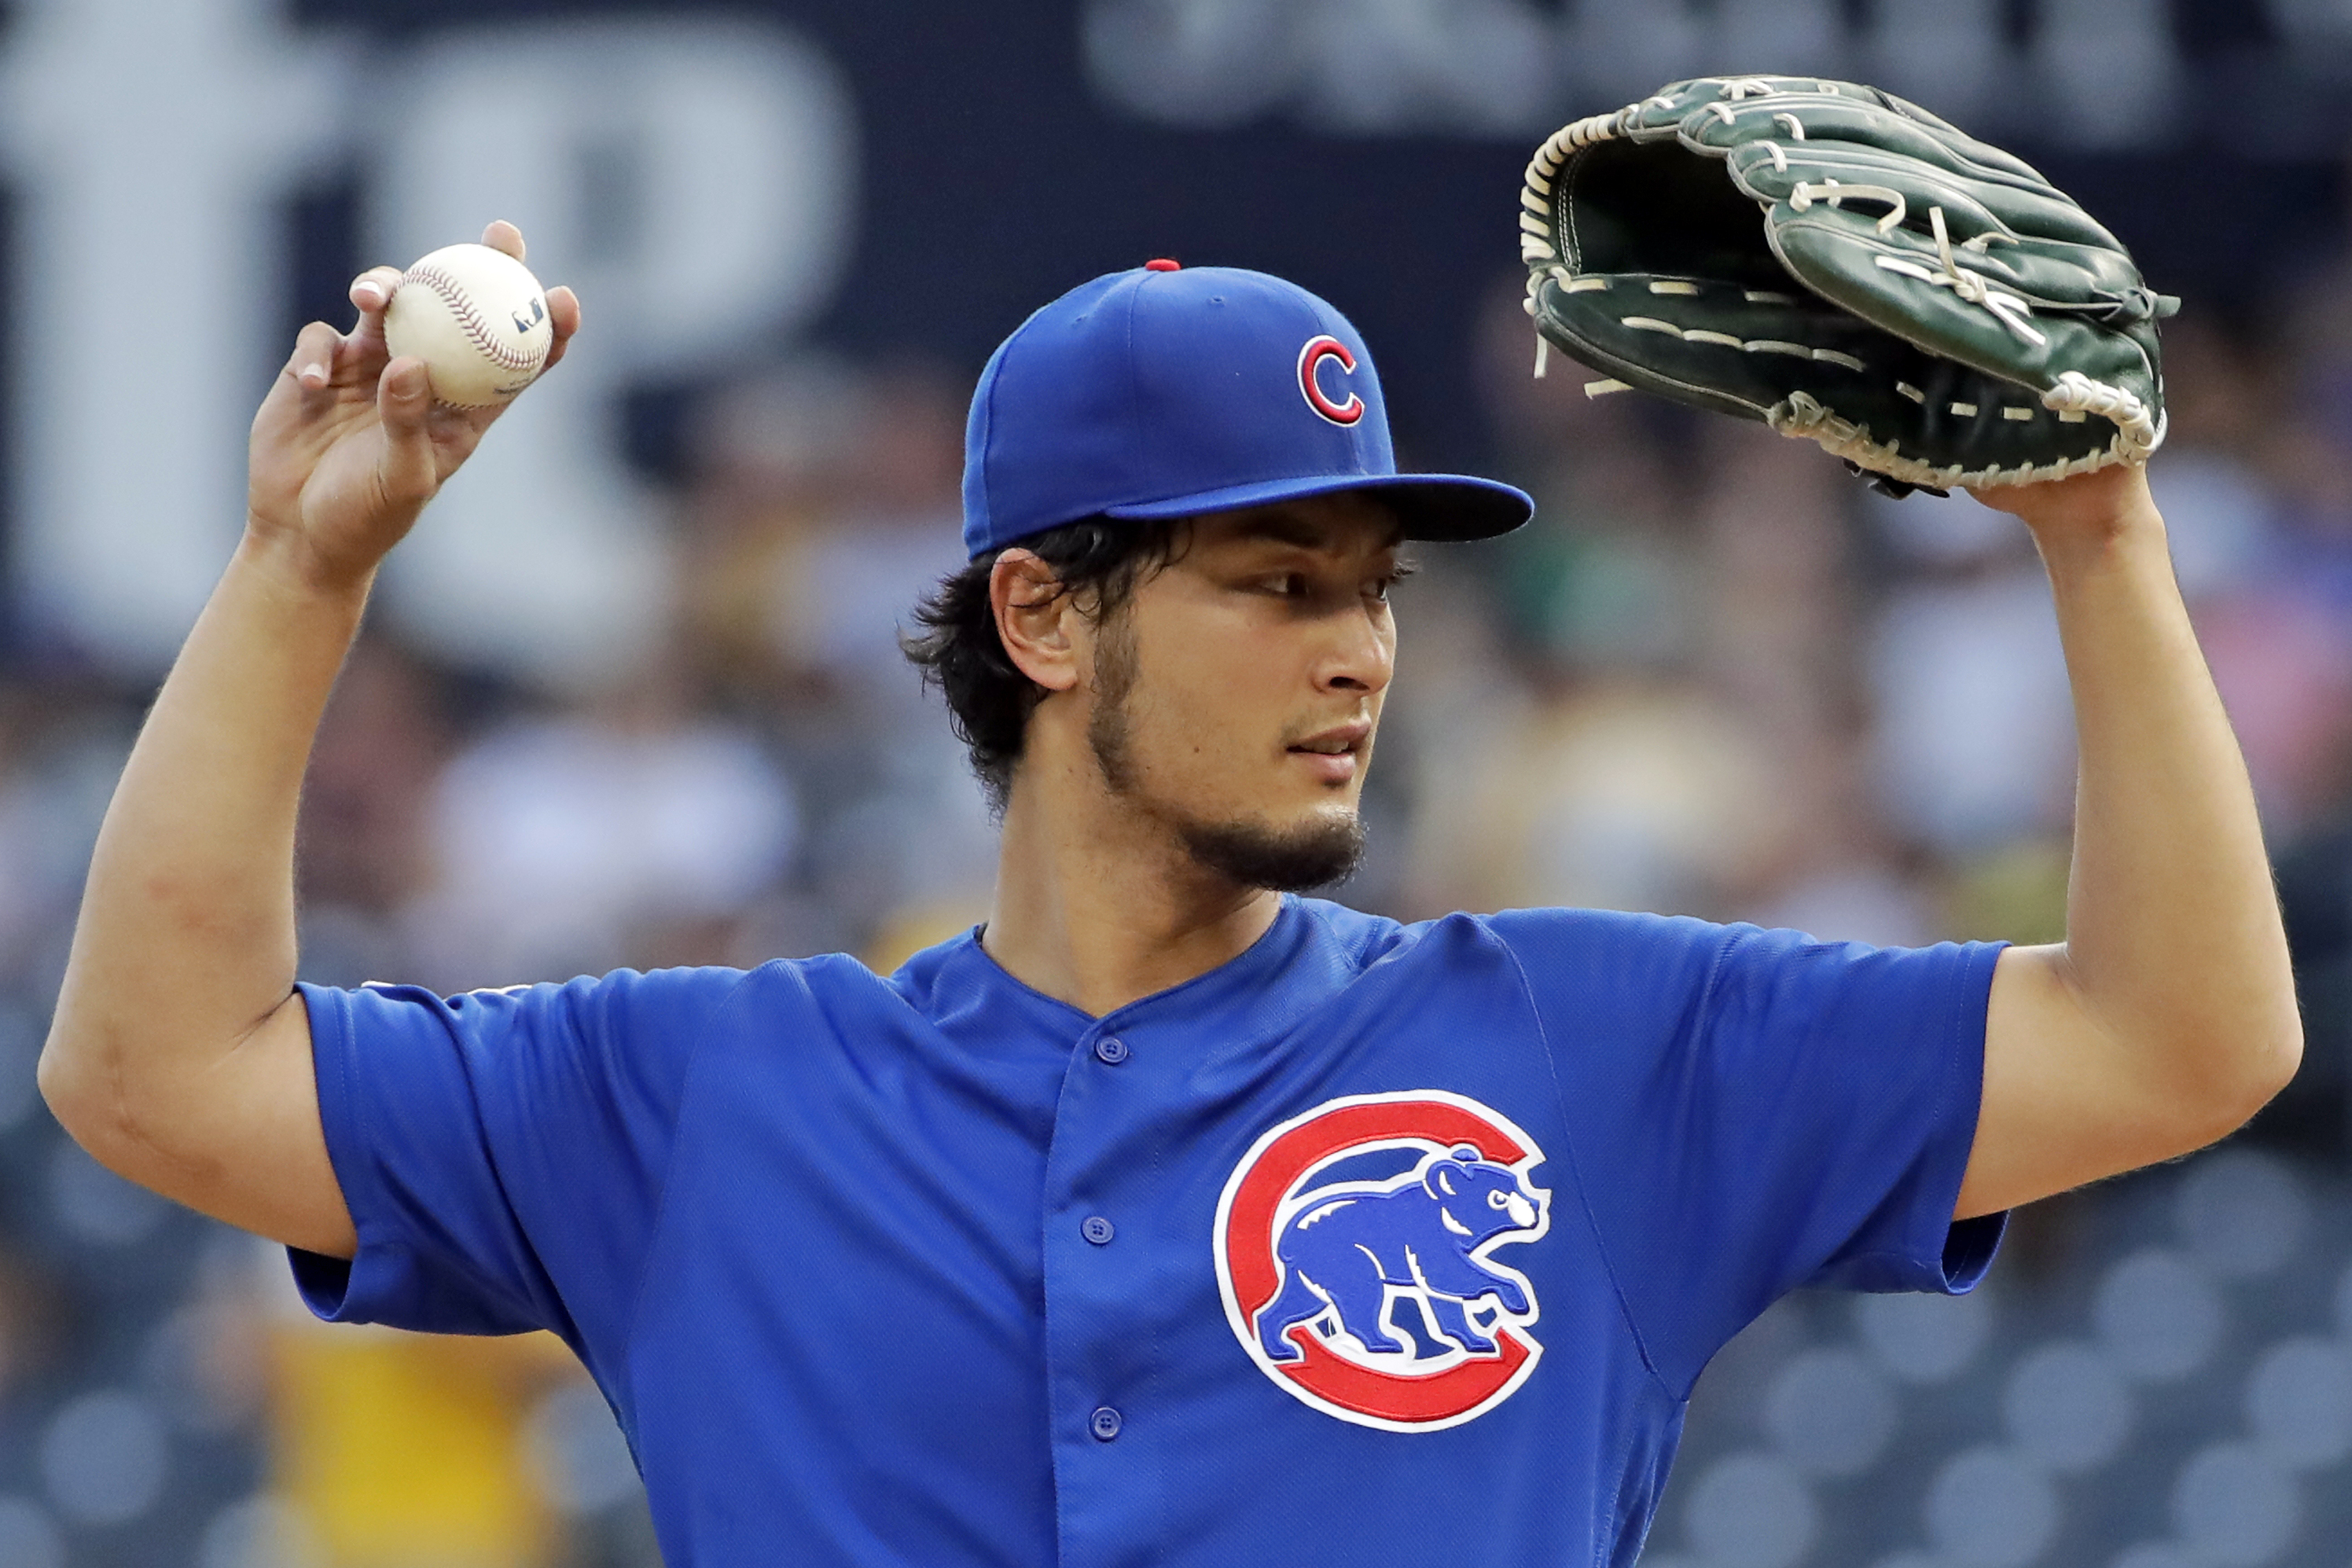 Yu Darvish, Cubs finalize $126 million, 6-year contract